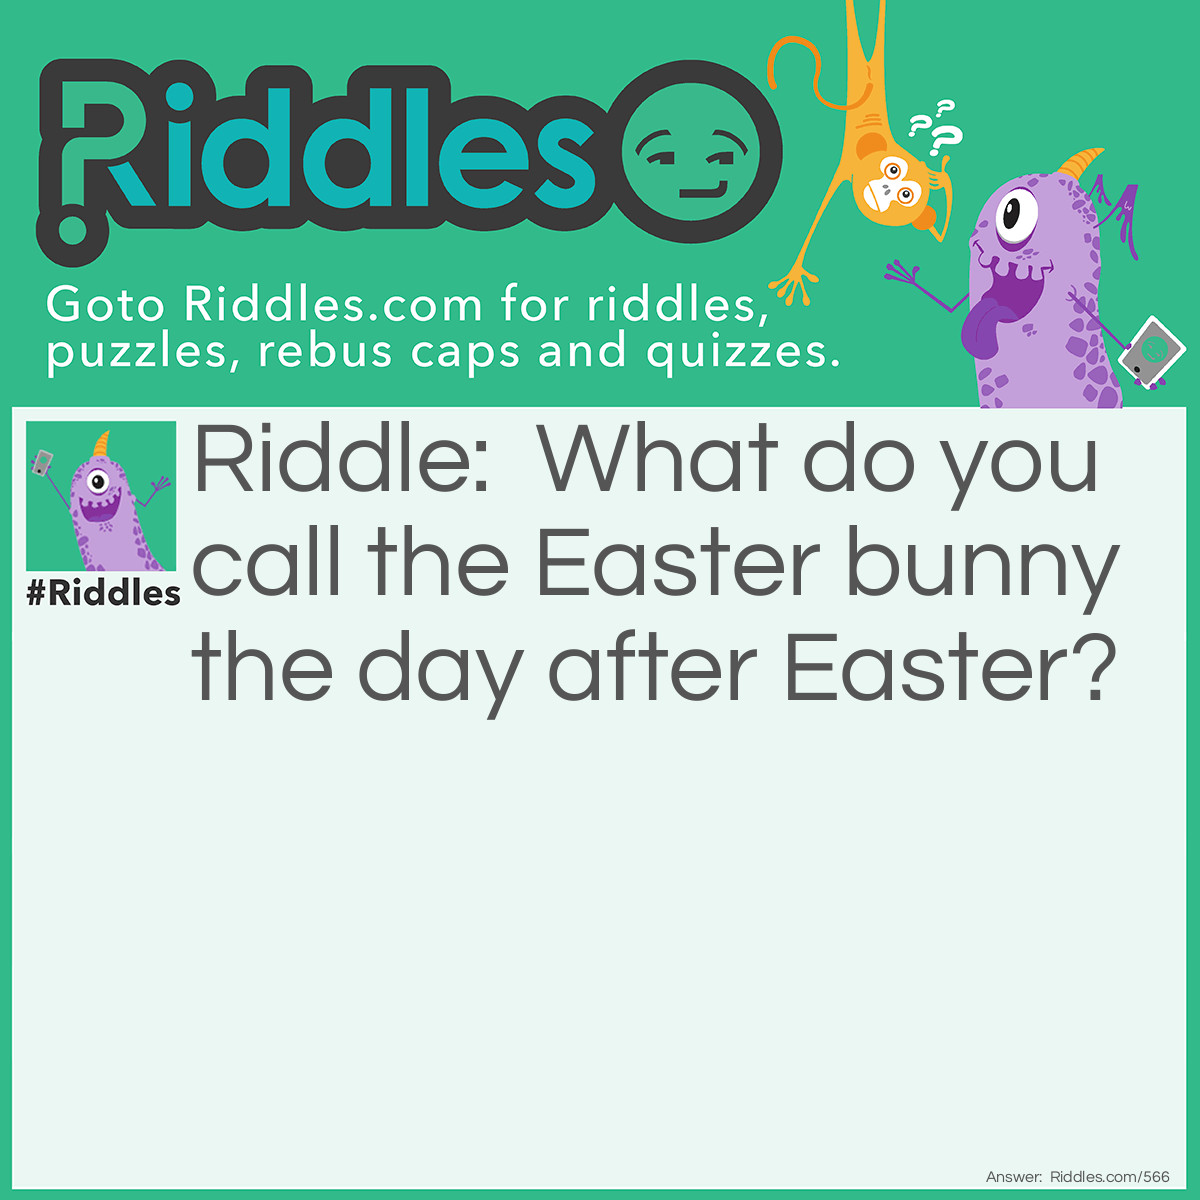 Riddle: What do you call the Easter bunny the day after Easter? Answer: Tired!